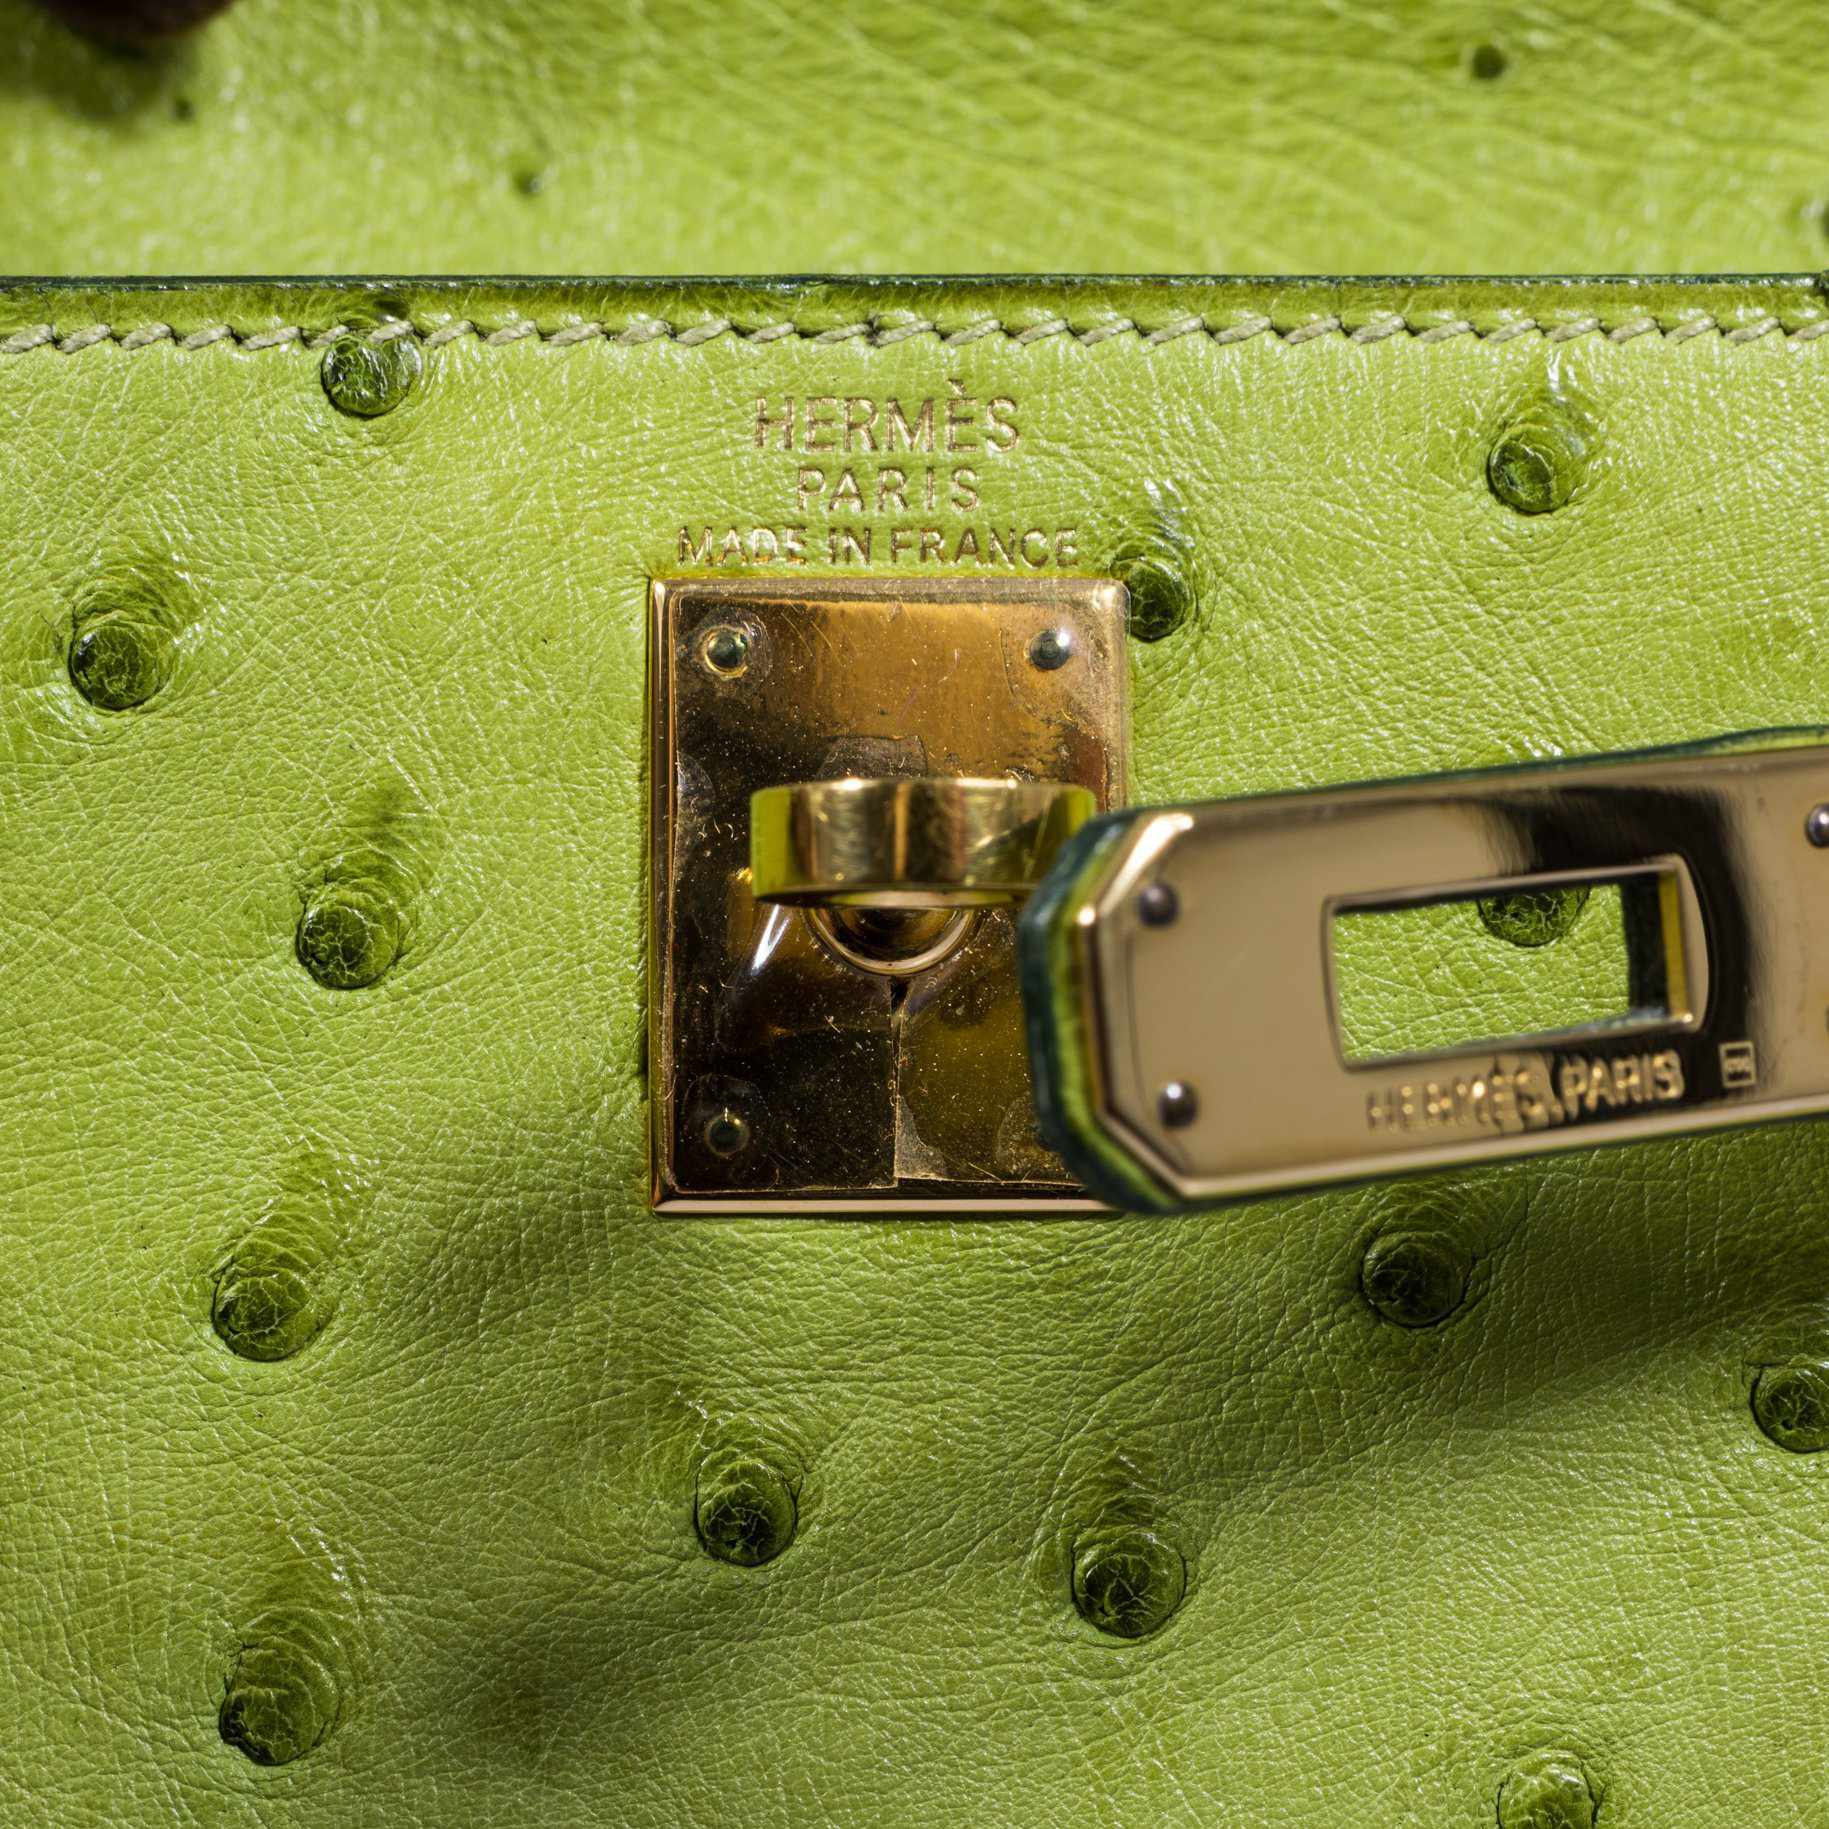 Hermès Kelly a Dos Backpack Vert Anis Ostrich Gold Hardware